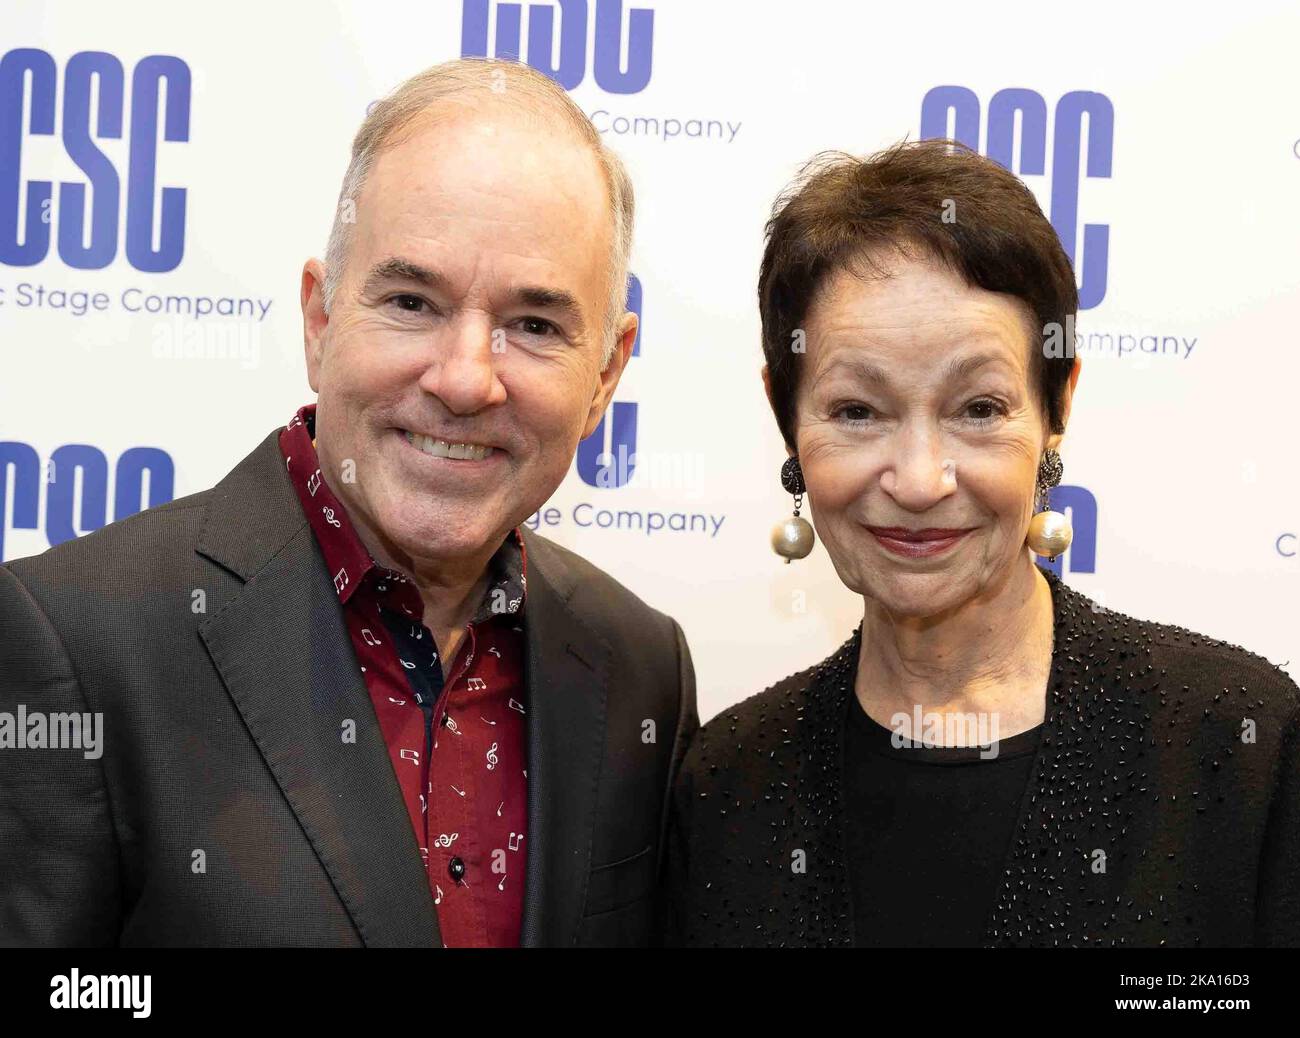 New York, NY, USA. 30th Oct, 2022. Stephen Flaherty, Lynn Ahrens in attendance for A MAN OF NO IMPORTANCE Opening Night on Broadway, Classic Stage Company, New York, NY October 30, 2022. Credit: Manoli Figetakis/Everett Collection/Alamy Live News Stock Photo